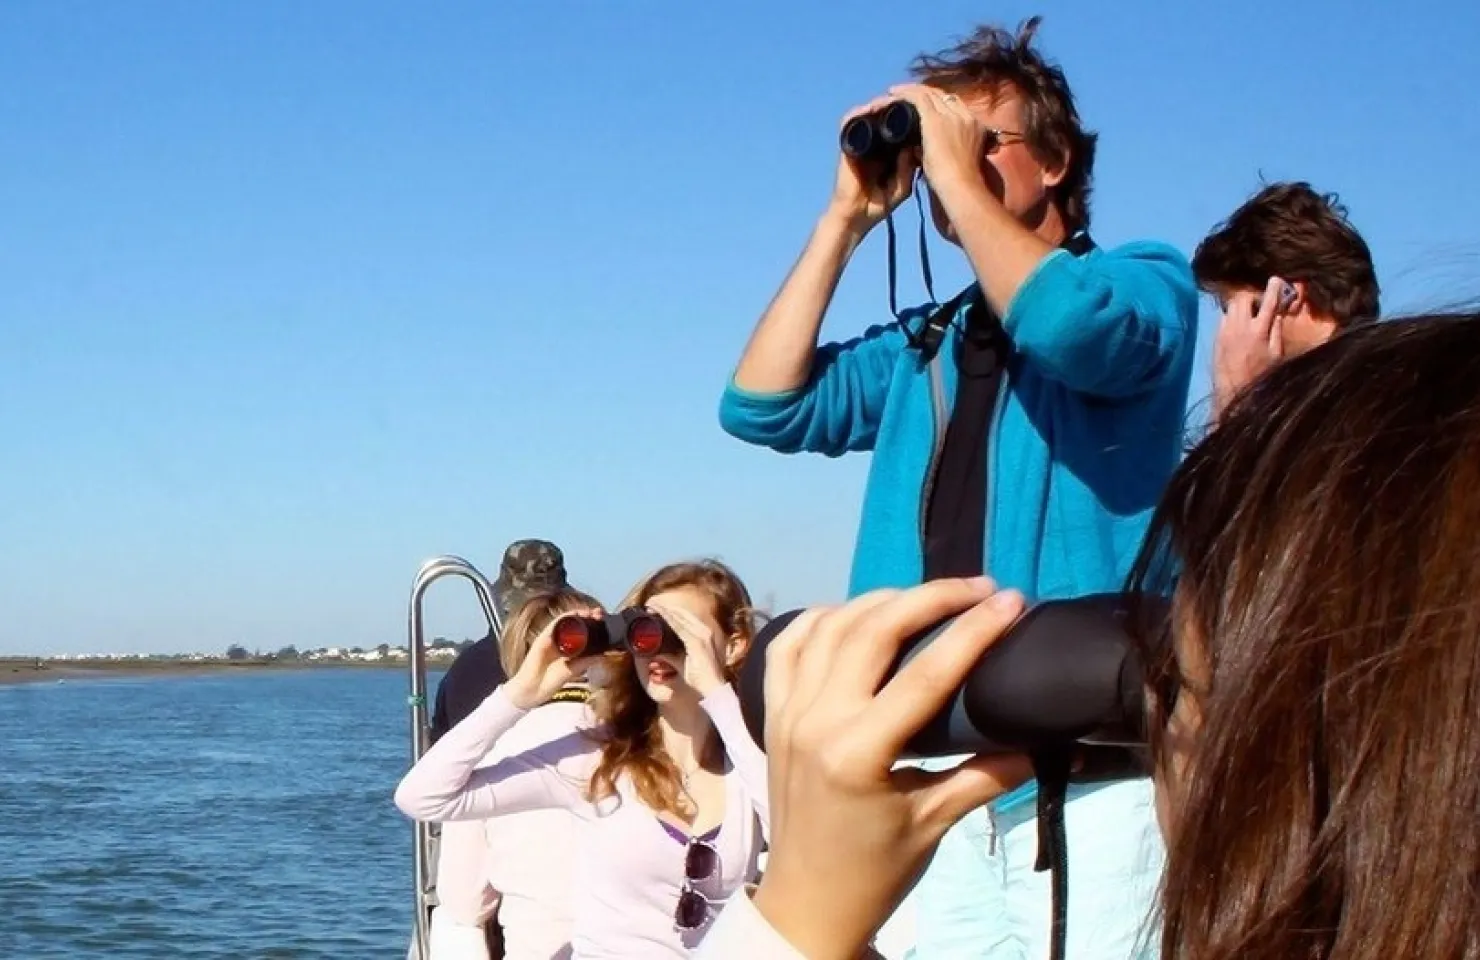 Birdwatching Experience in Ria Formosa - Activities and Things to Do in Ria Formosa Natural Park